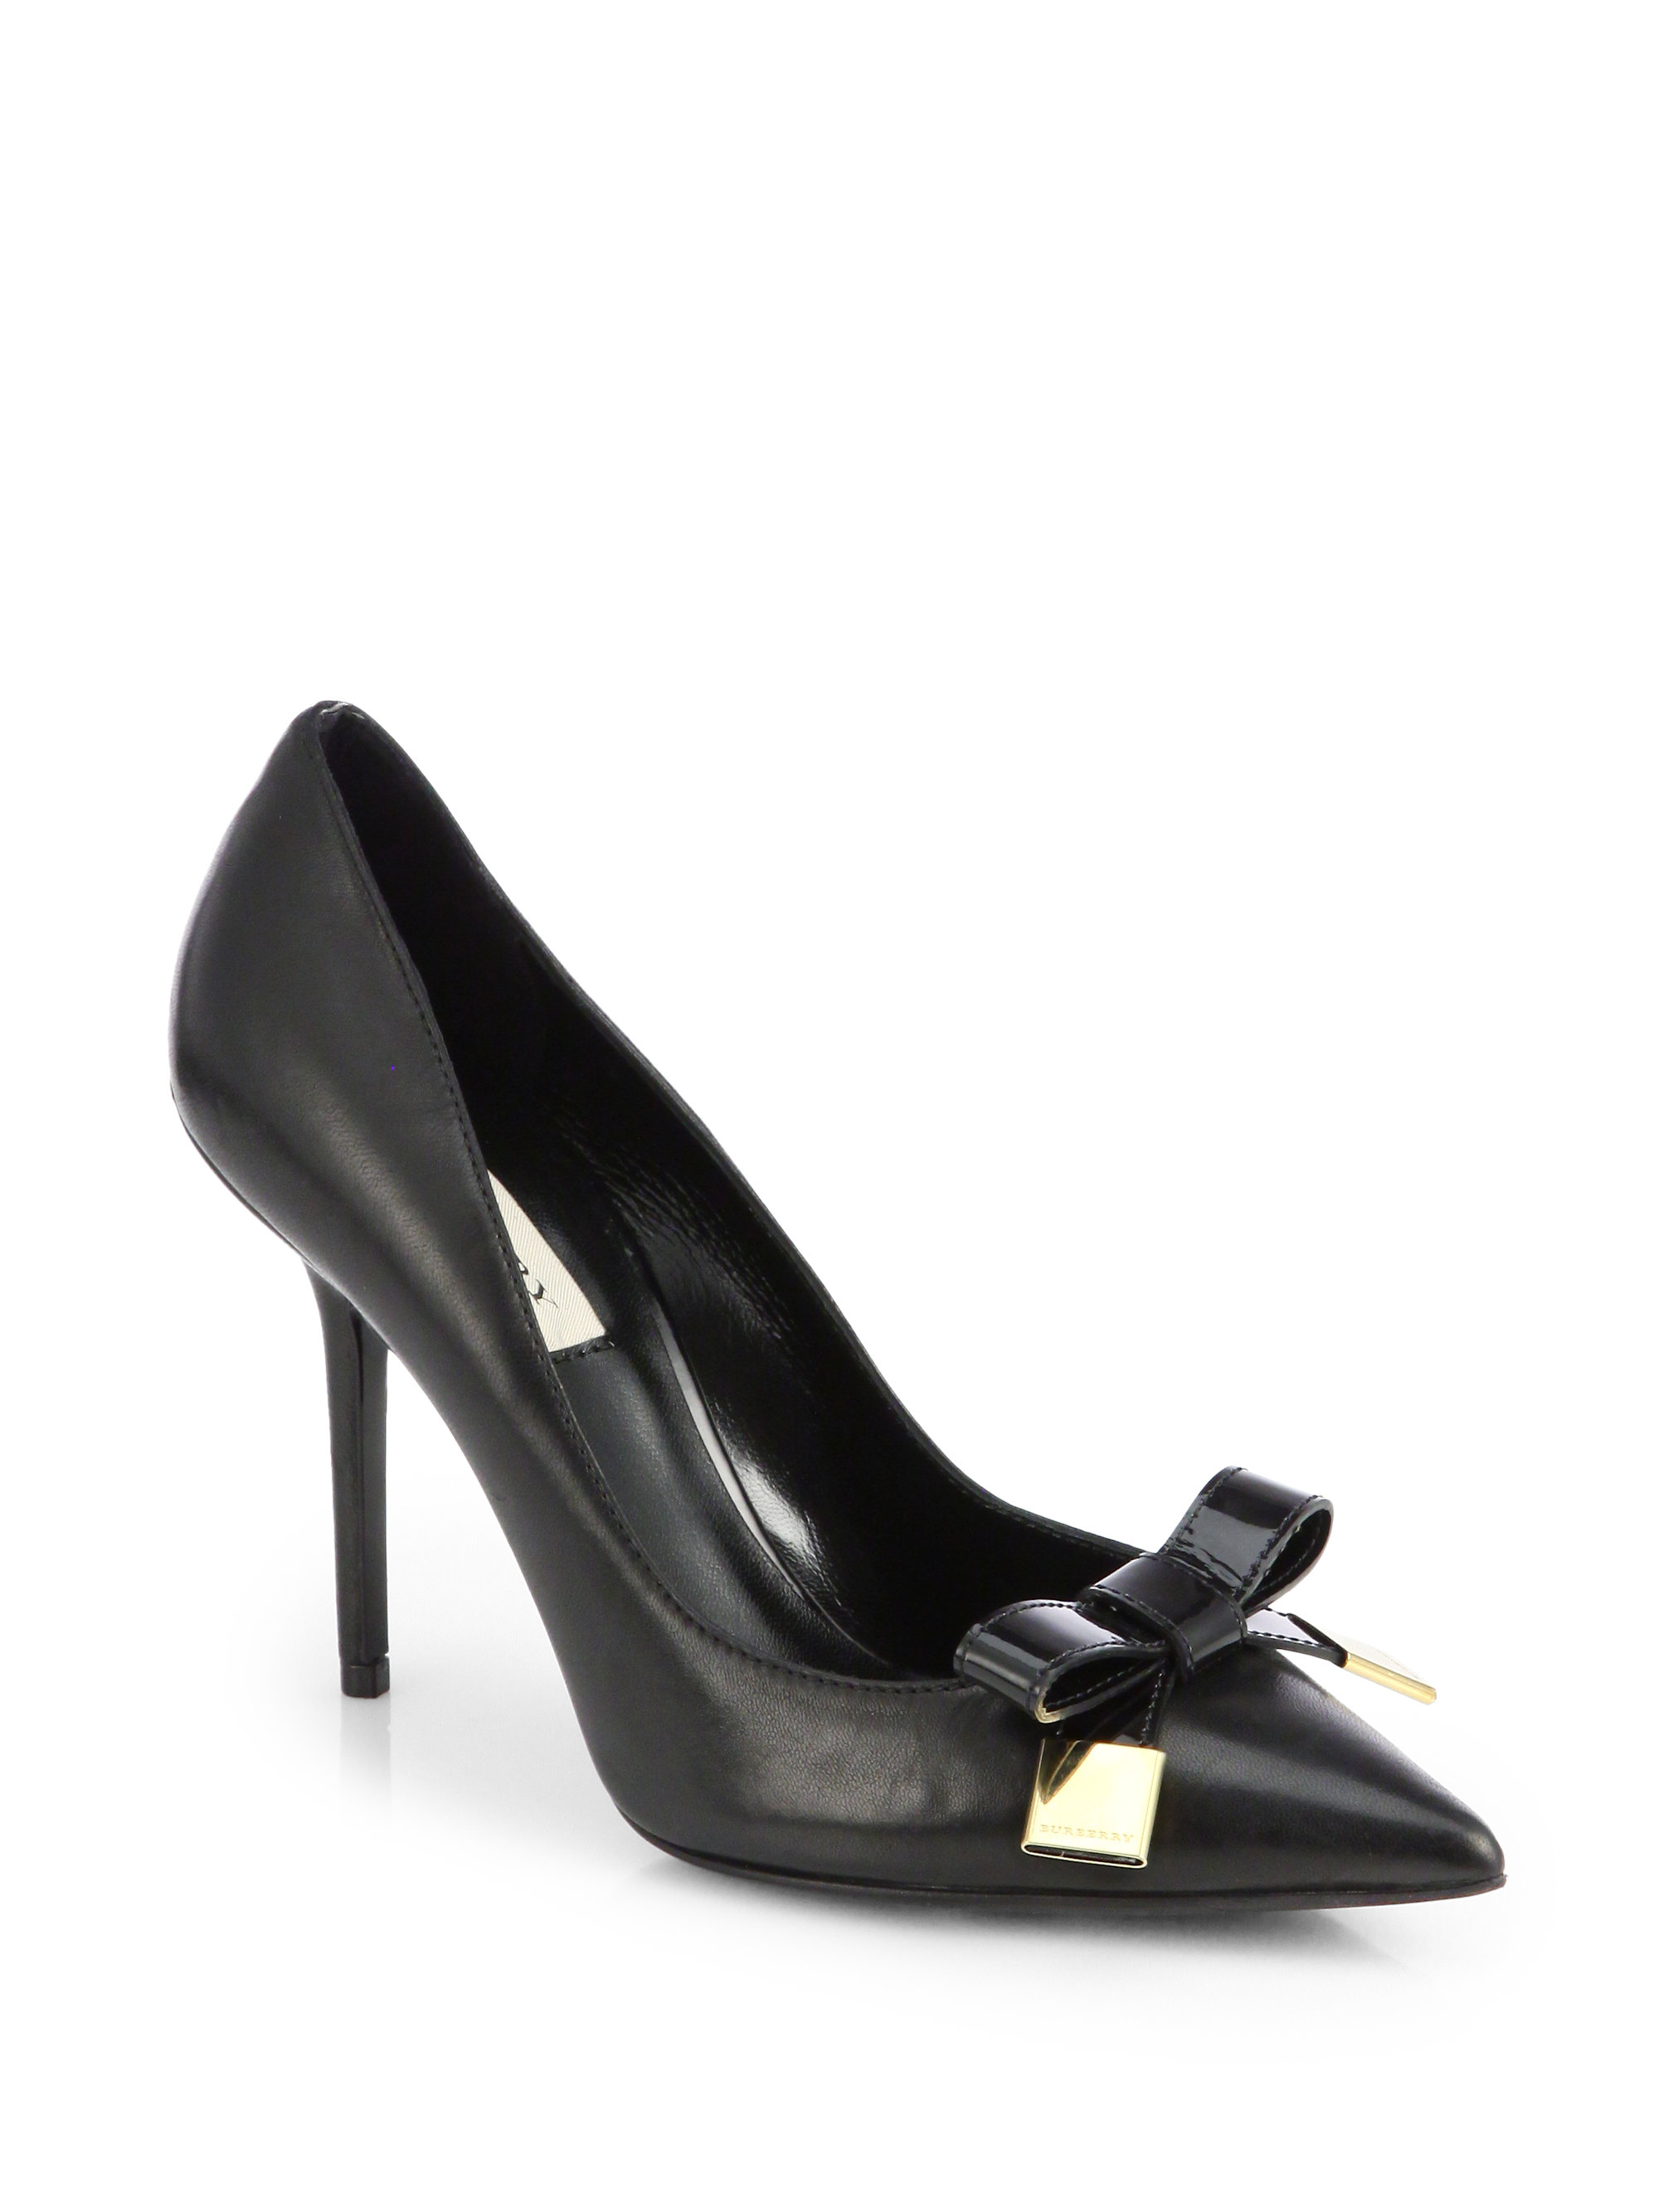 Lyst - Burberry Soden Leather Bow Pumps in Black